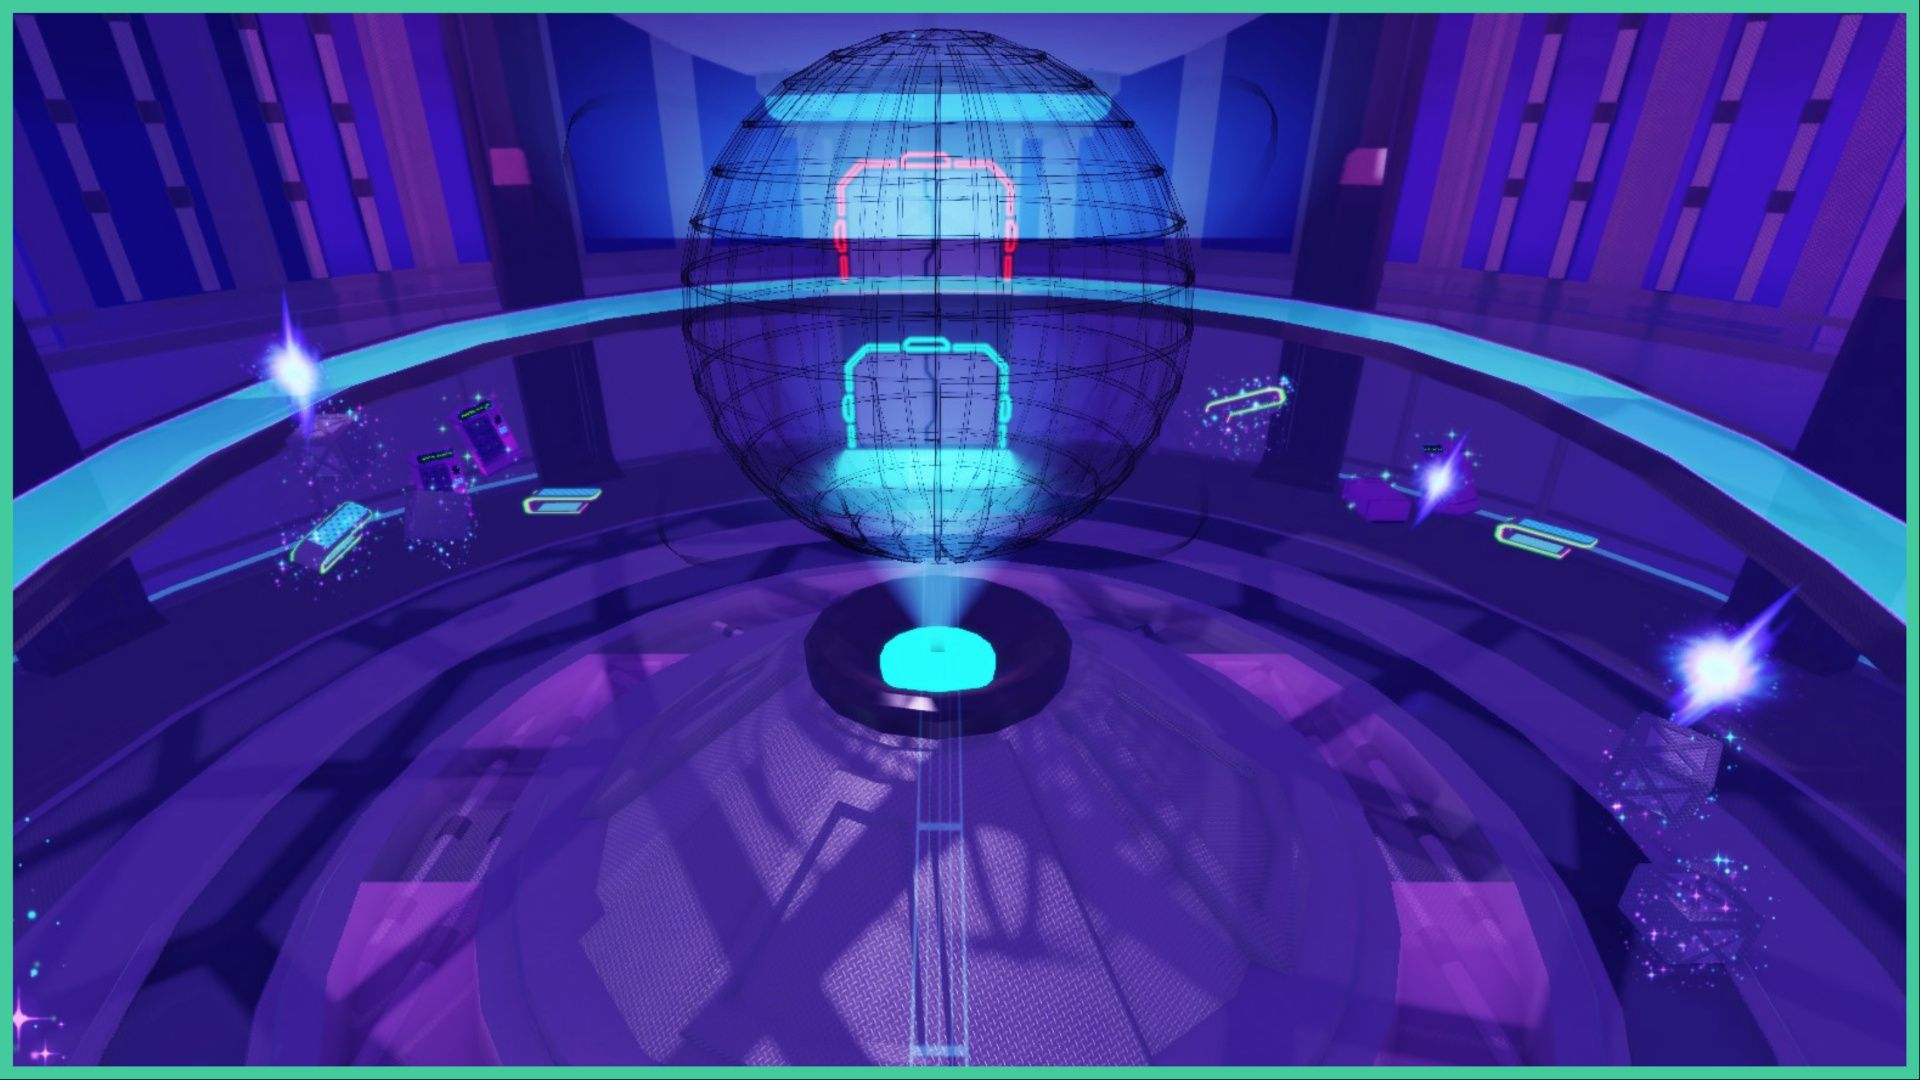 feature image for our astro renaissance the hunt guide, the image features a screenshot of the main event hub area, with a large globe hologram in the middle, with glowing rifts scattered around the room with floating sparkling boxes underneath, there is a second floor that stretches like a ring around the top of building with a door that has red lights around it as it is locked